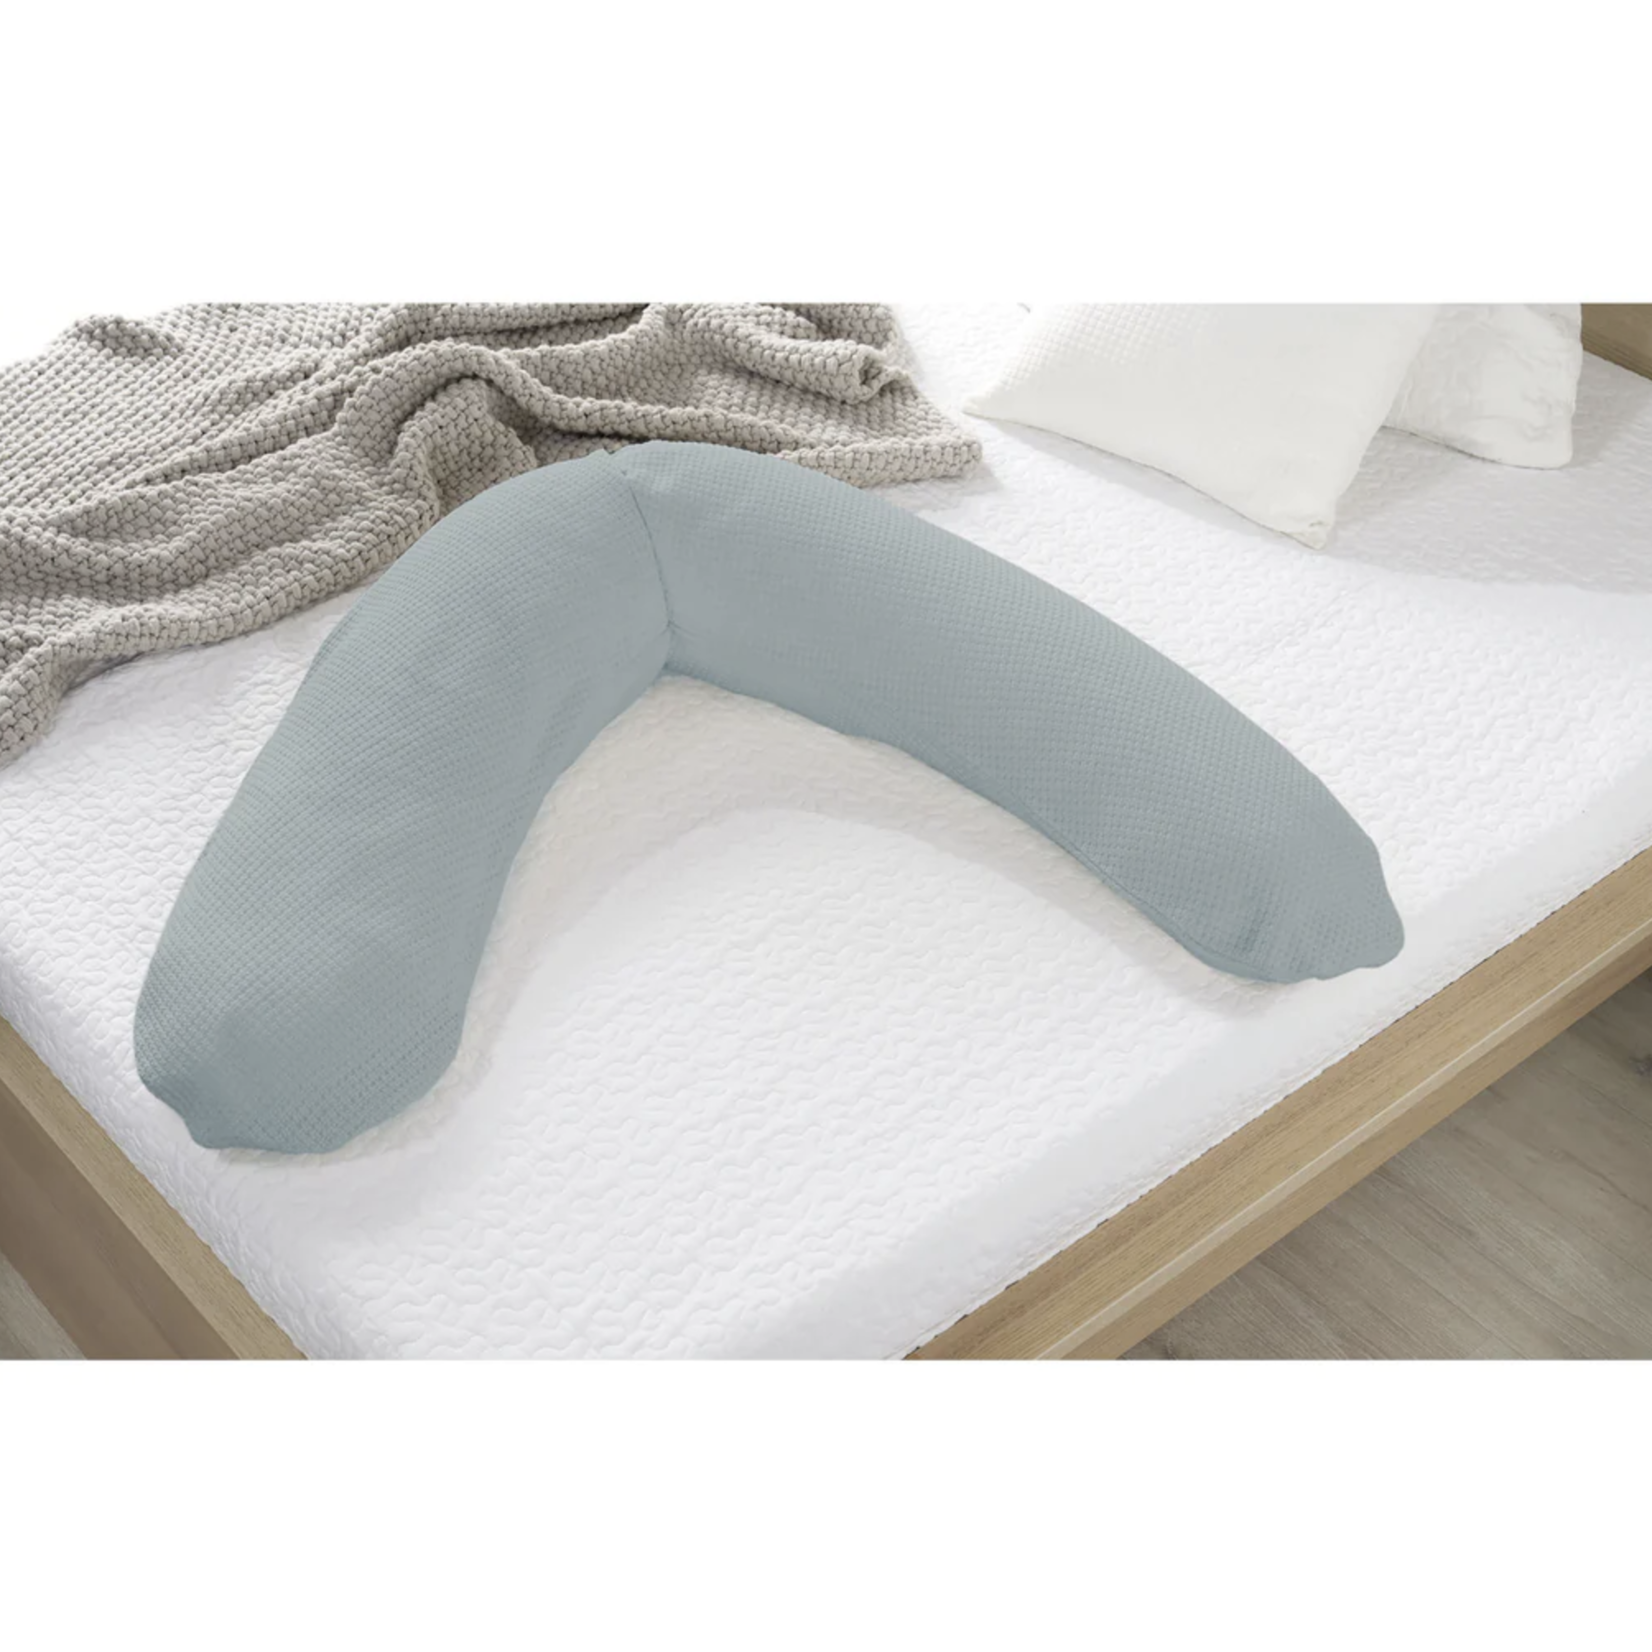 THERALINE The Original Maternity and Nursing Pillow - Misty Blue Fine Knit